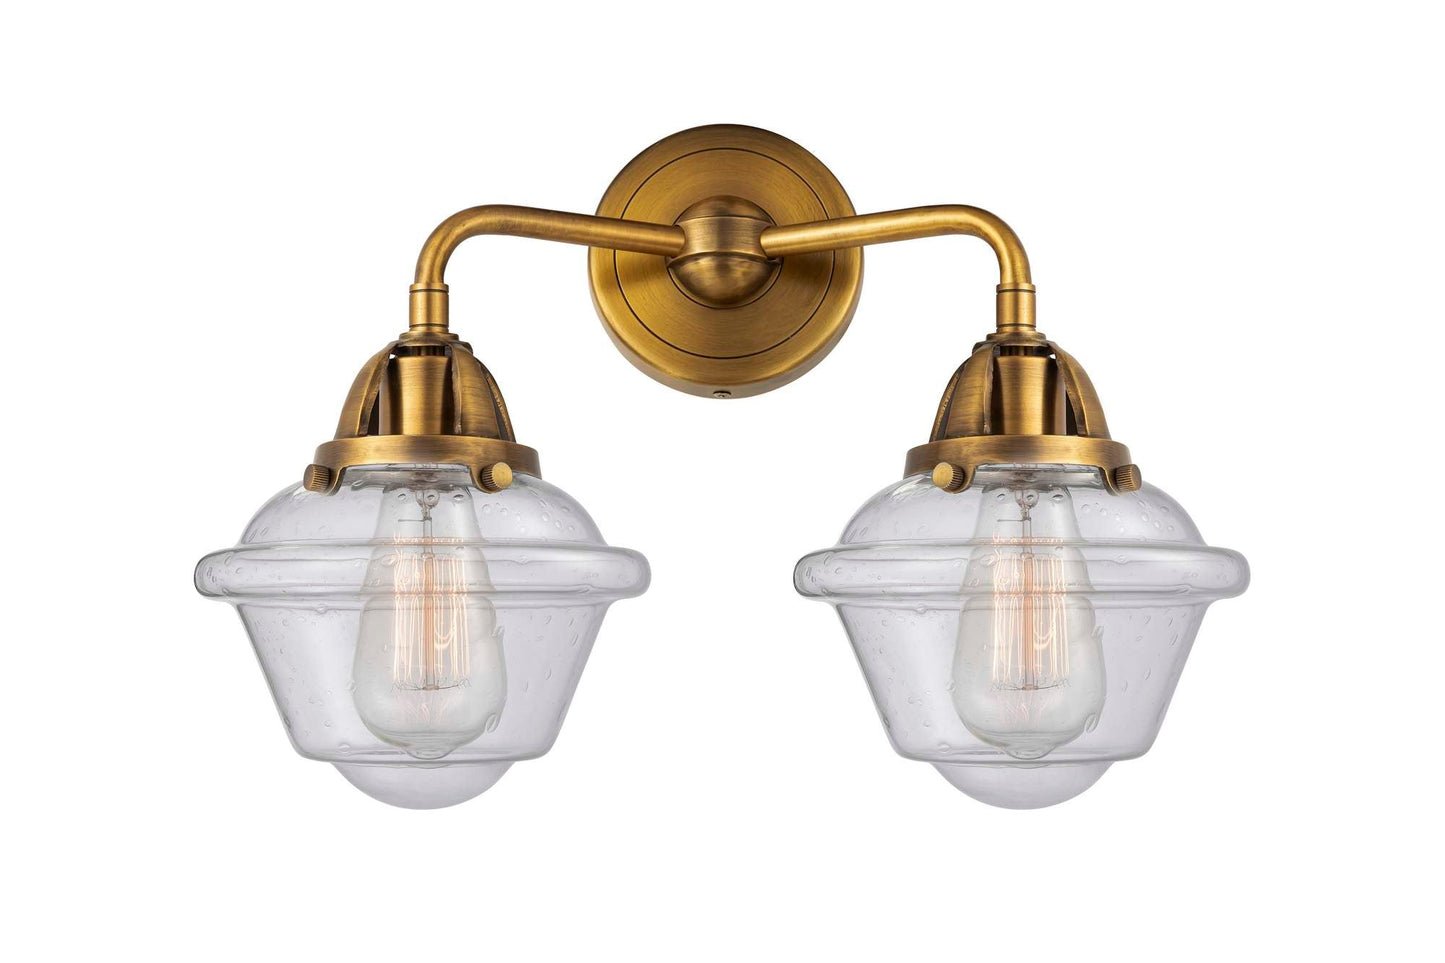 288-2W-BB-G534 2-Light 15.5" Brushed Brass Bath Vanity Light - Seedy Small Oxford Glass - LED Bulb - Dimmensions: 15.5 x 8 x 12.125 - Glass Up or Down: Yes